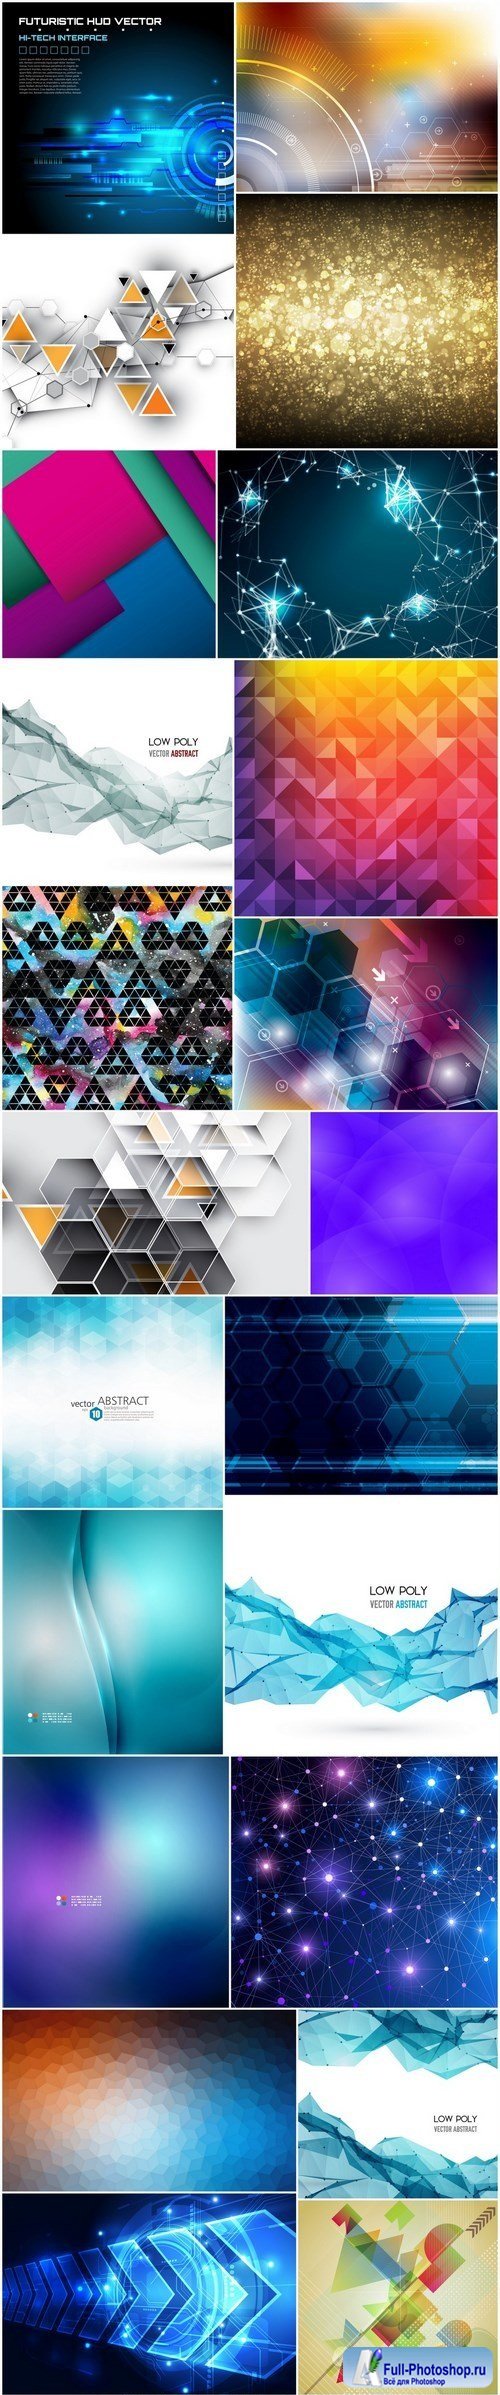 Amazing Abstract Backgrounds Collection 29 - 25xEPS